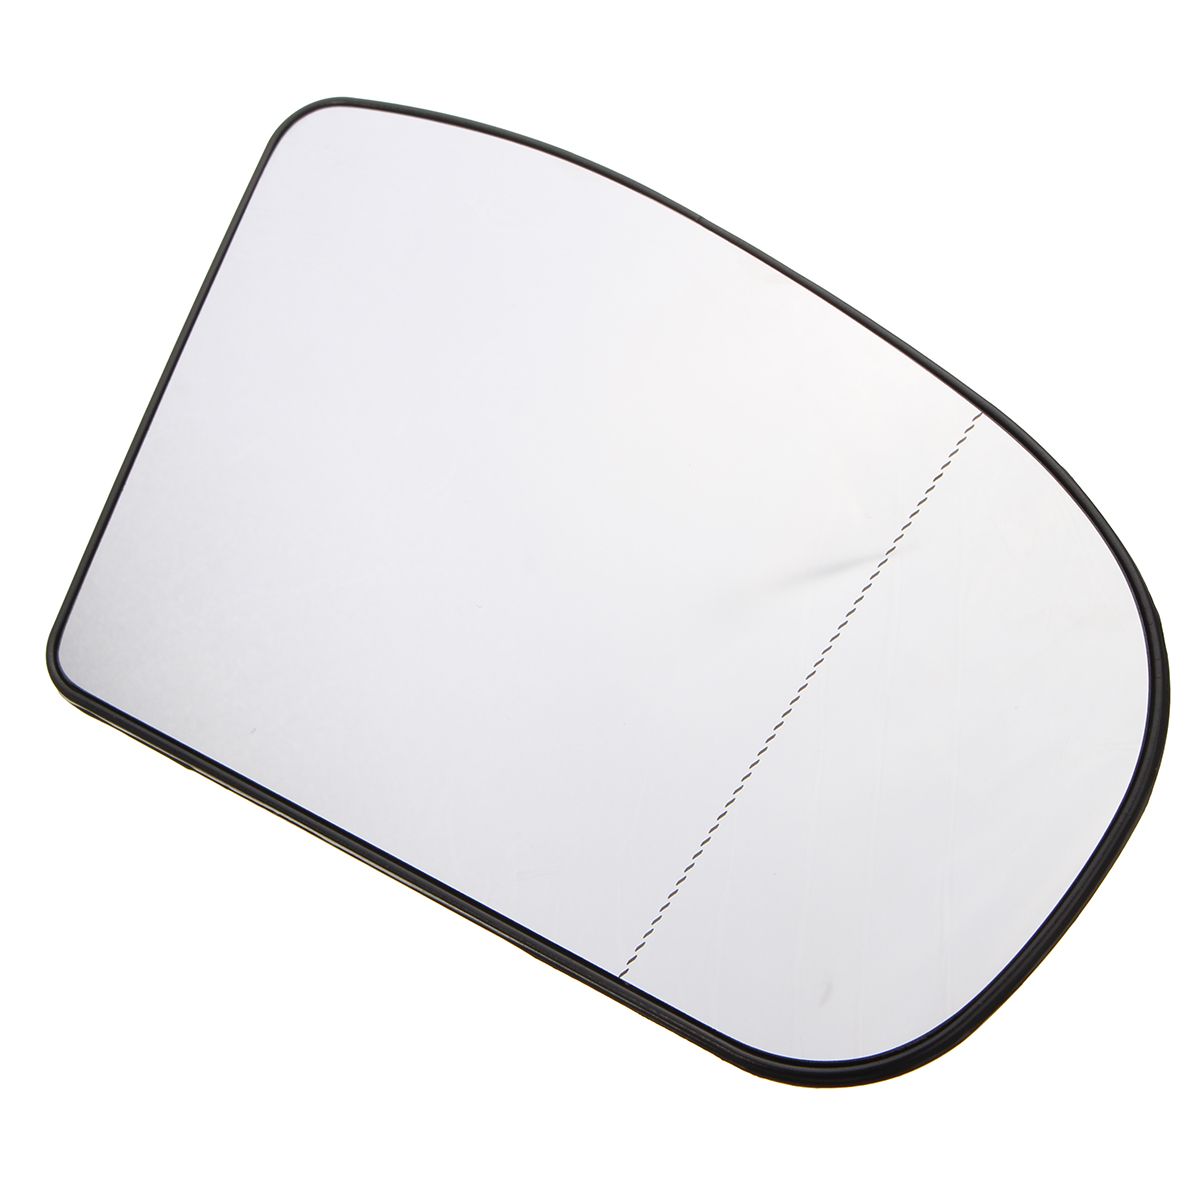 Right-Wing-Car-Mirror-Glass-For-Benz-C-Class-W203-2000-2007-Saloon-1384702